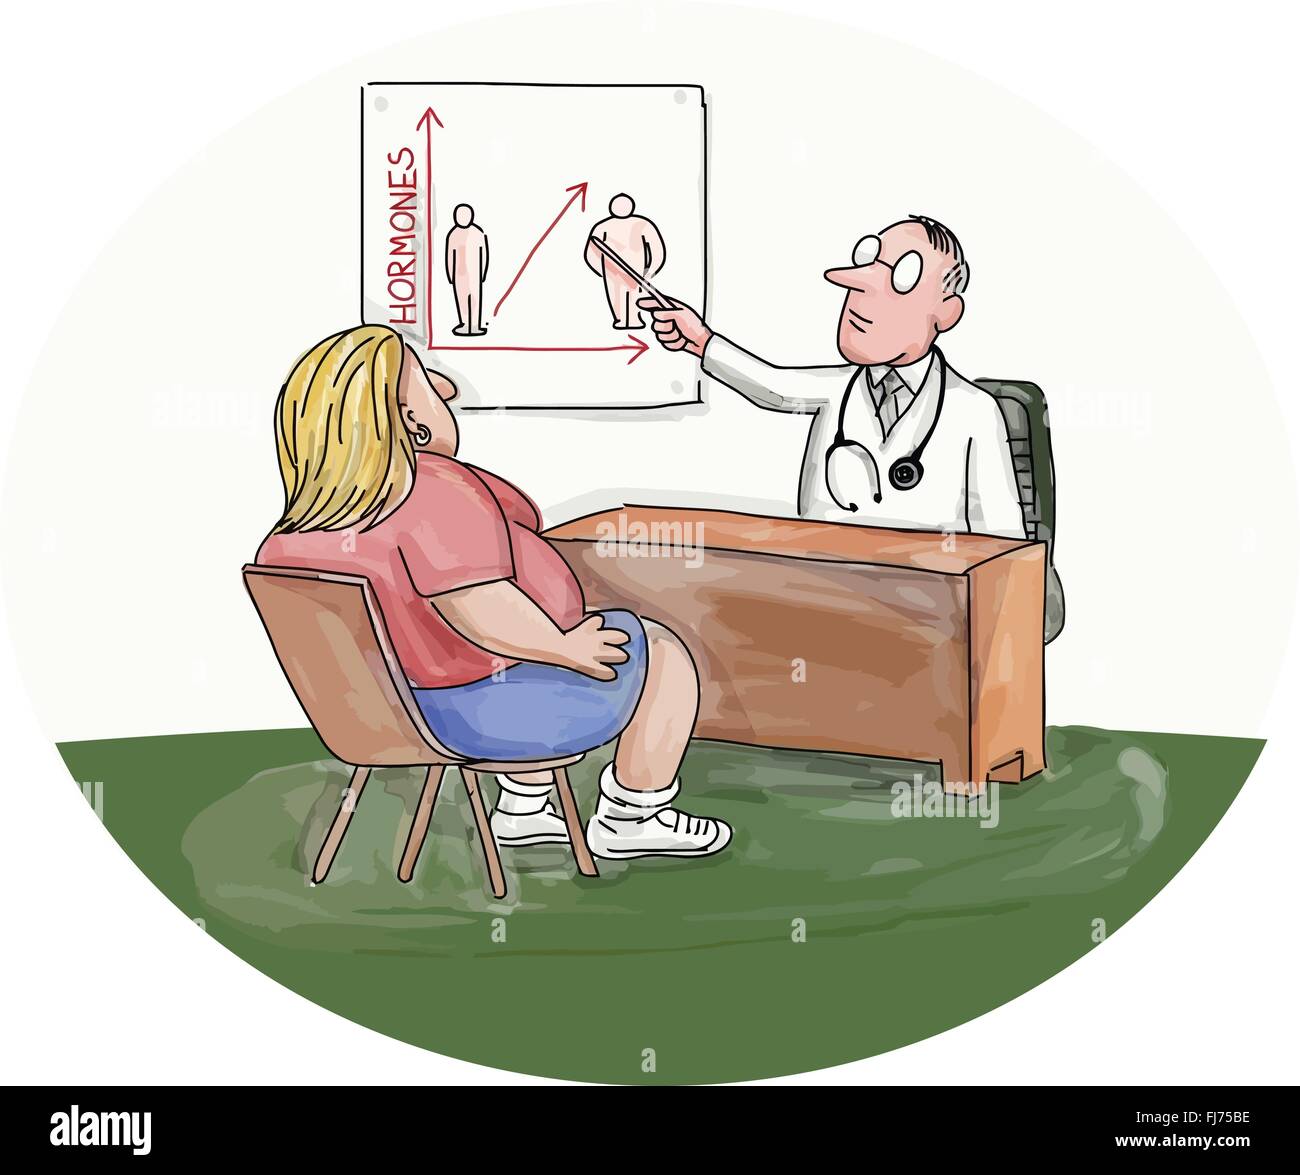 Illustration of an obese woman patient talking to her doctor who is pointing to a chart on the wall done in caricature style. Stock Vector